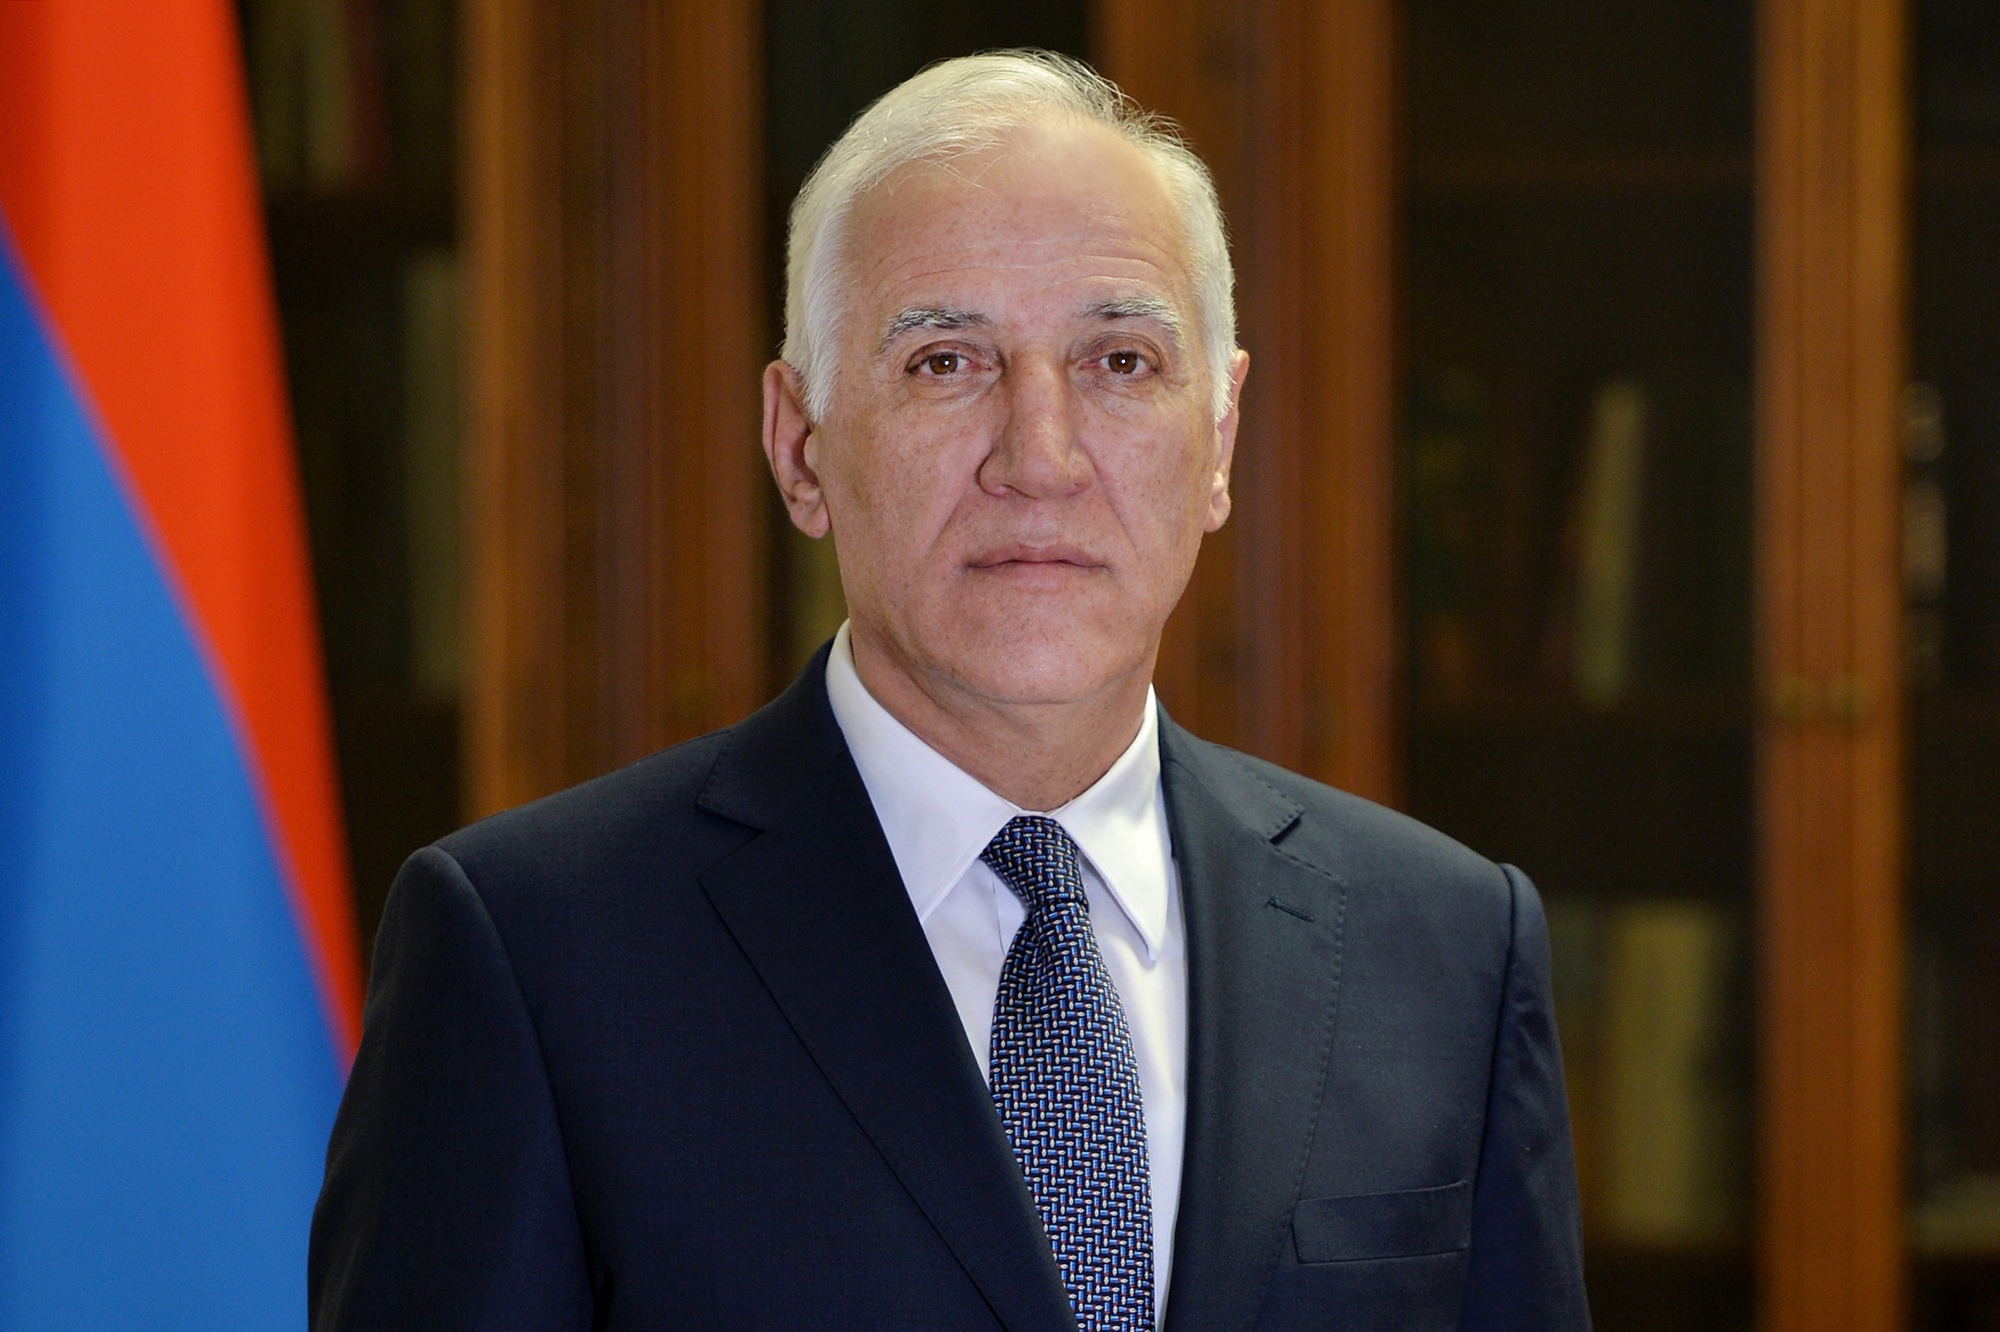 Natural disasters test states and peoples: President Vahagn Khachaturyan’s message on the 34th anniversary of the Spitak earthquake